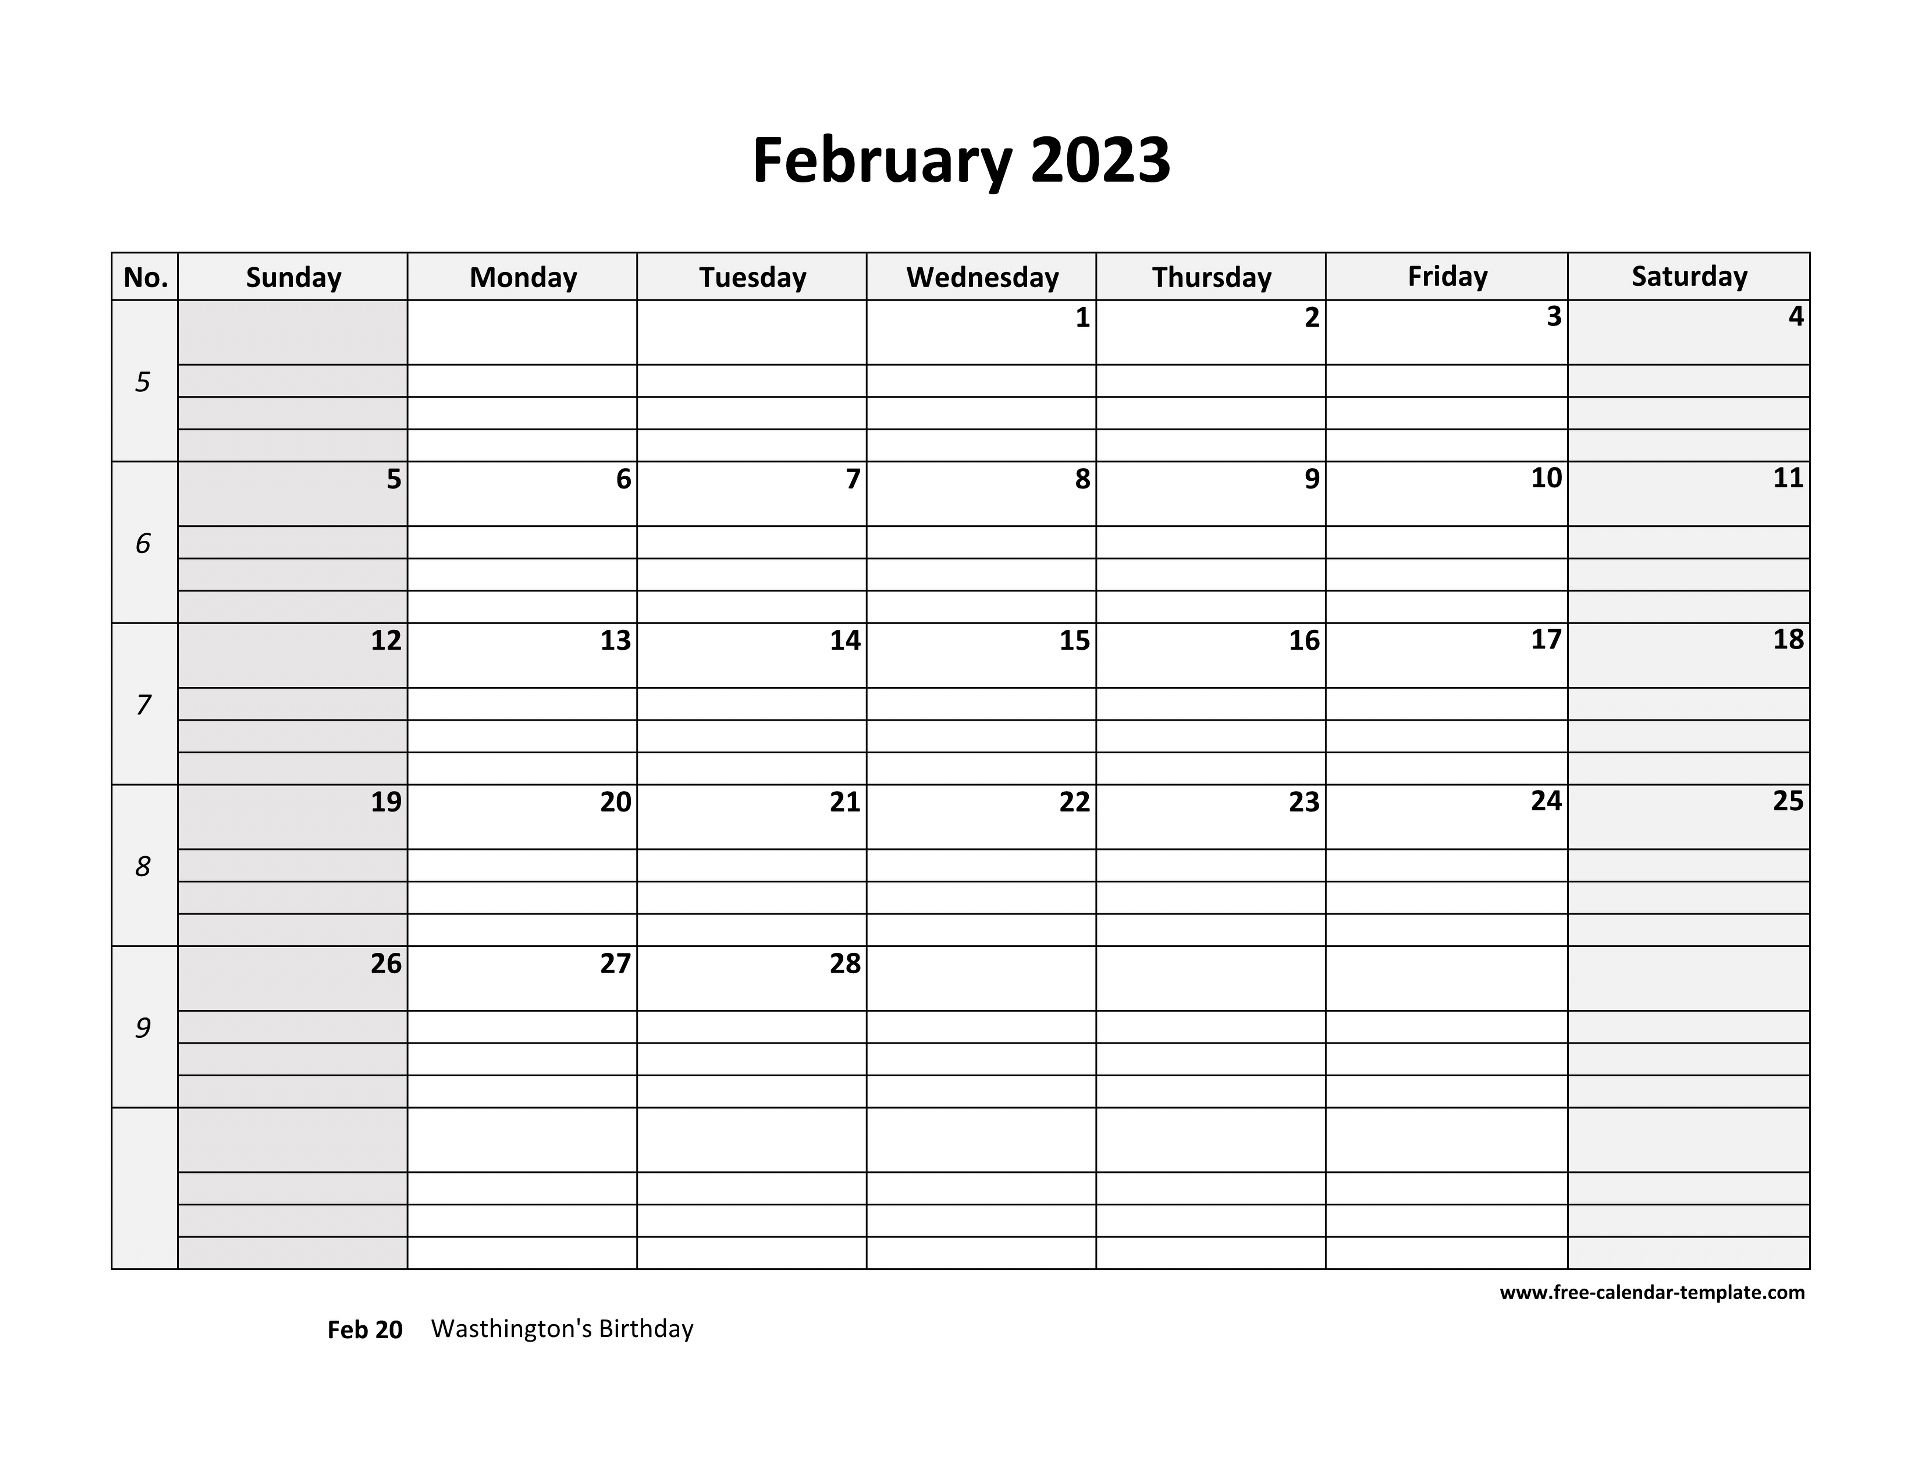 february-2023-calendar-with-lines-get-calender-2023-update